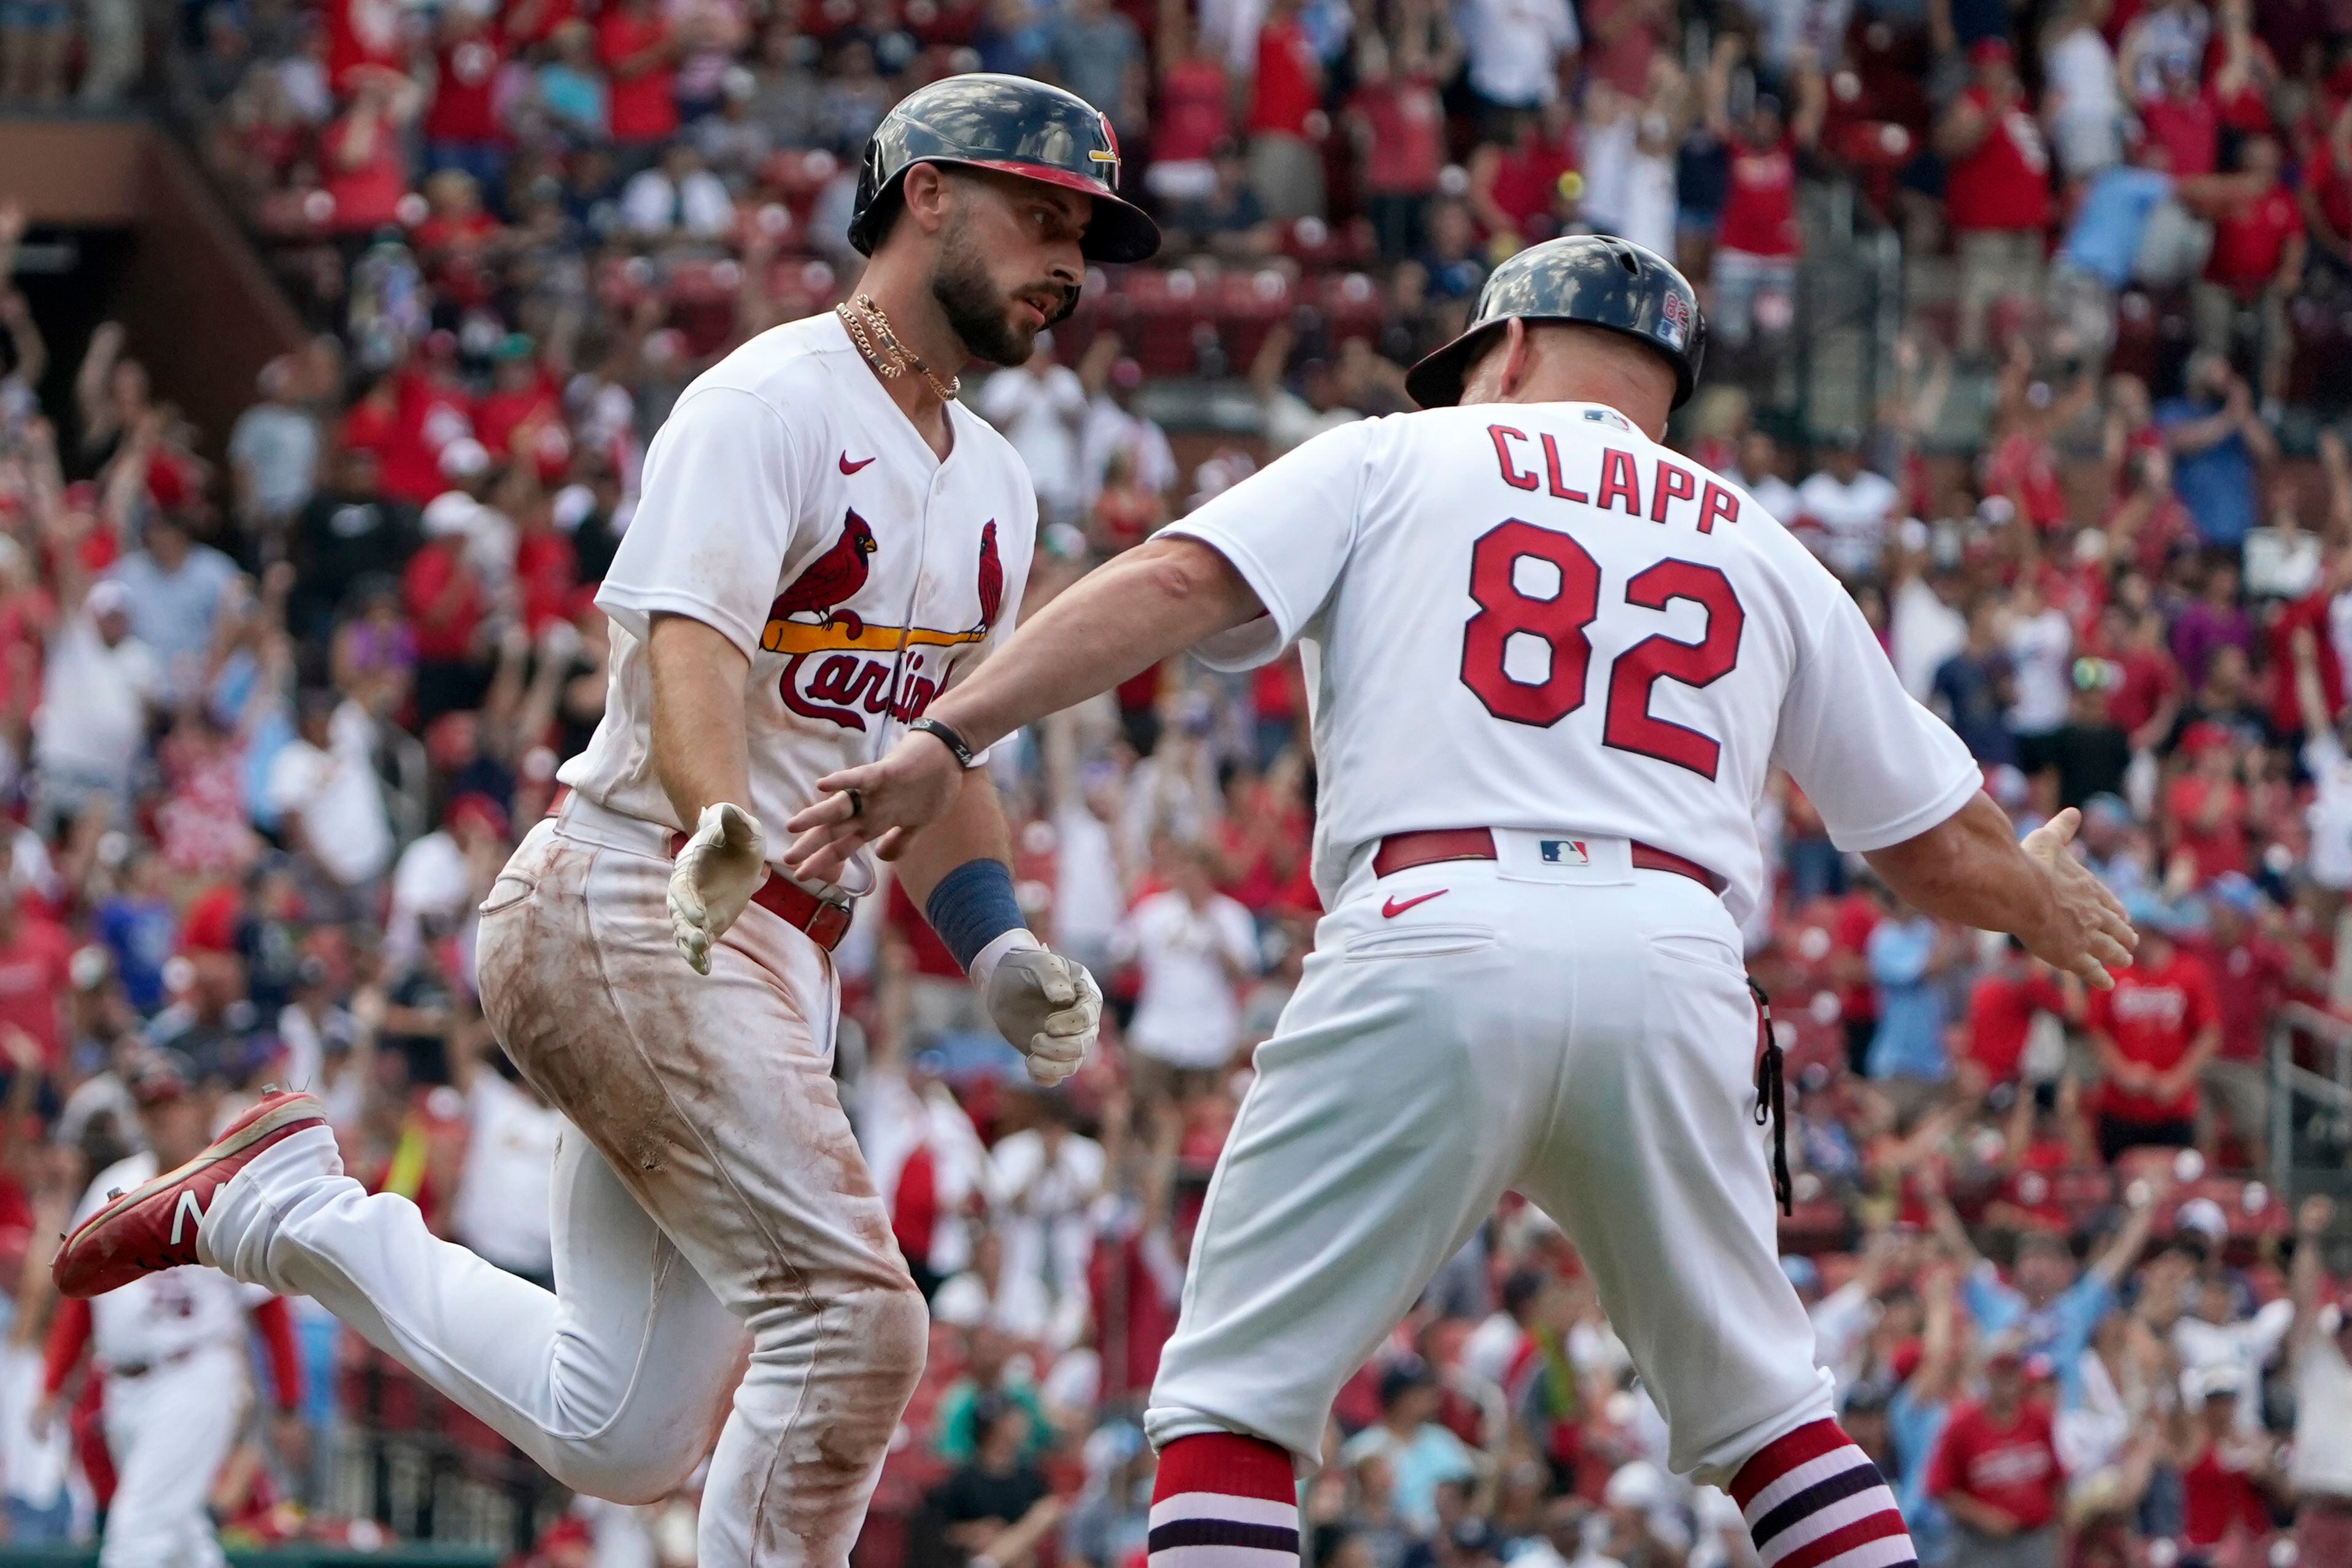 Yankees could go shopping on Cardinals' roster as they unload at